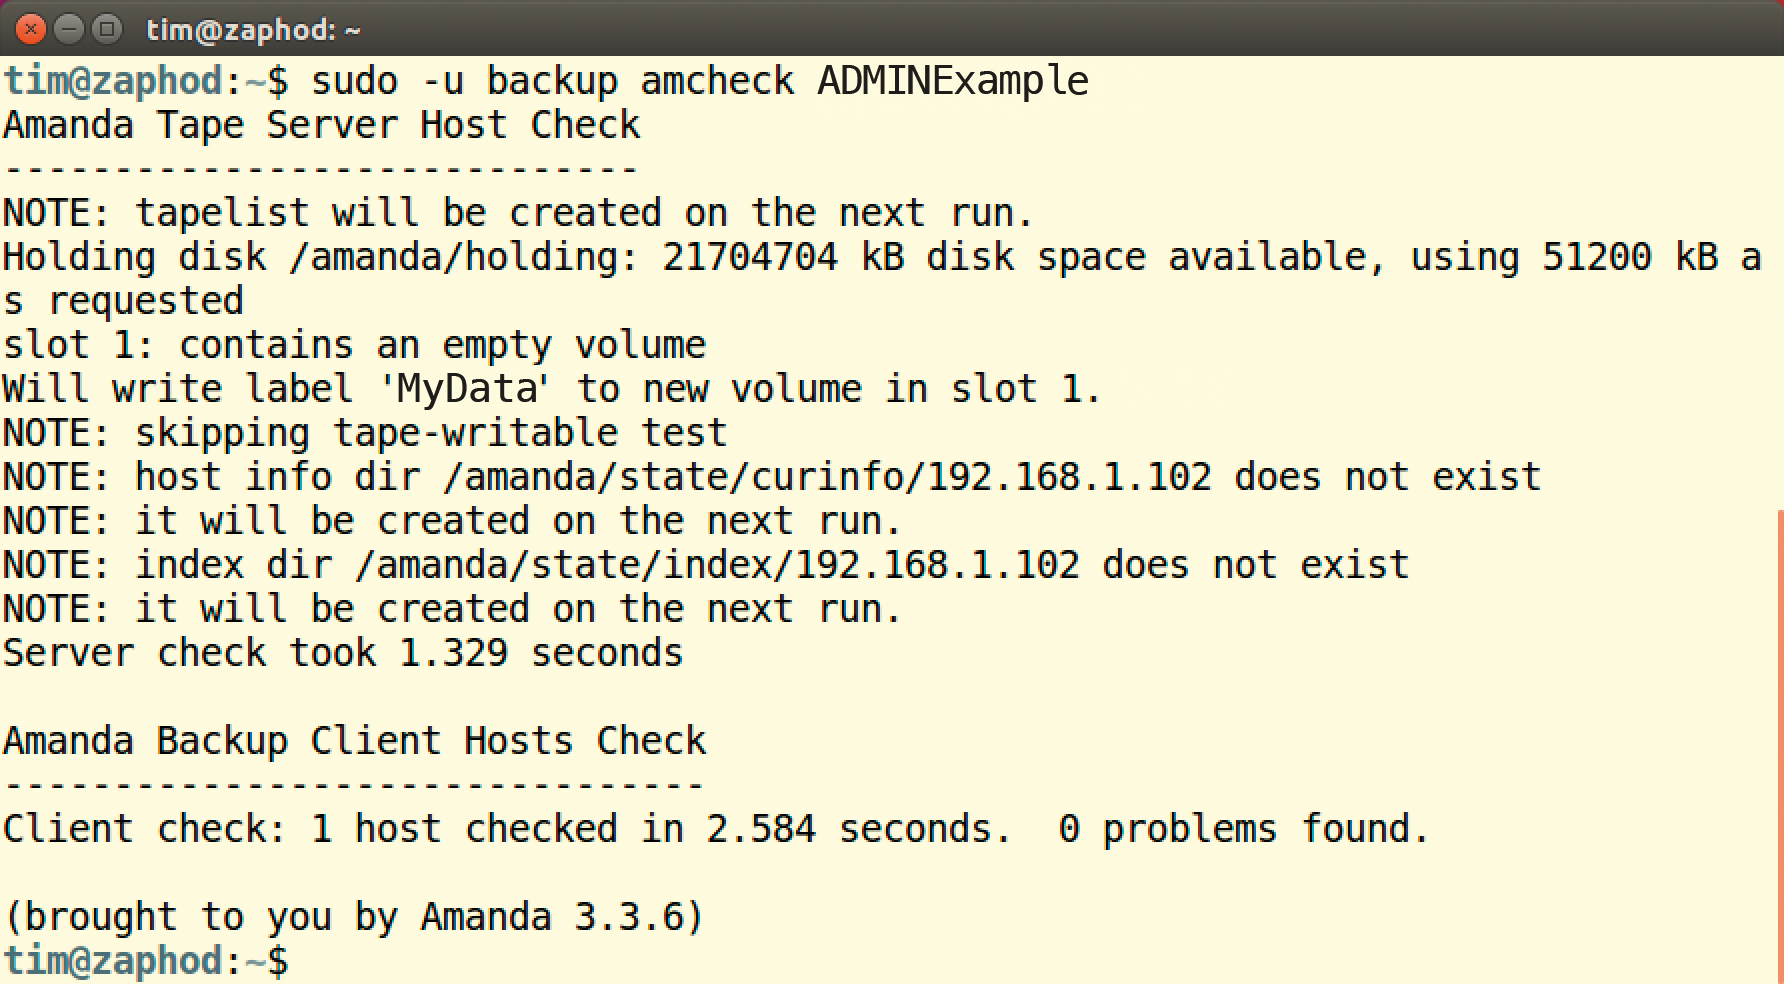 The NOTEs are not errors, but only references to data generated during the first backup run. In this case, Amanda needs to back up the computer with the IP address 192.168.1.102. 